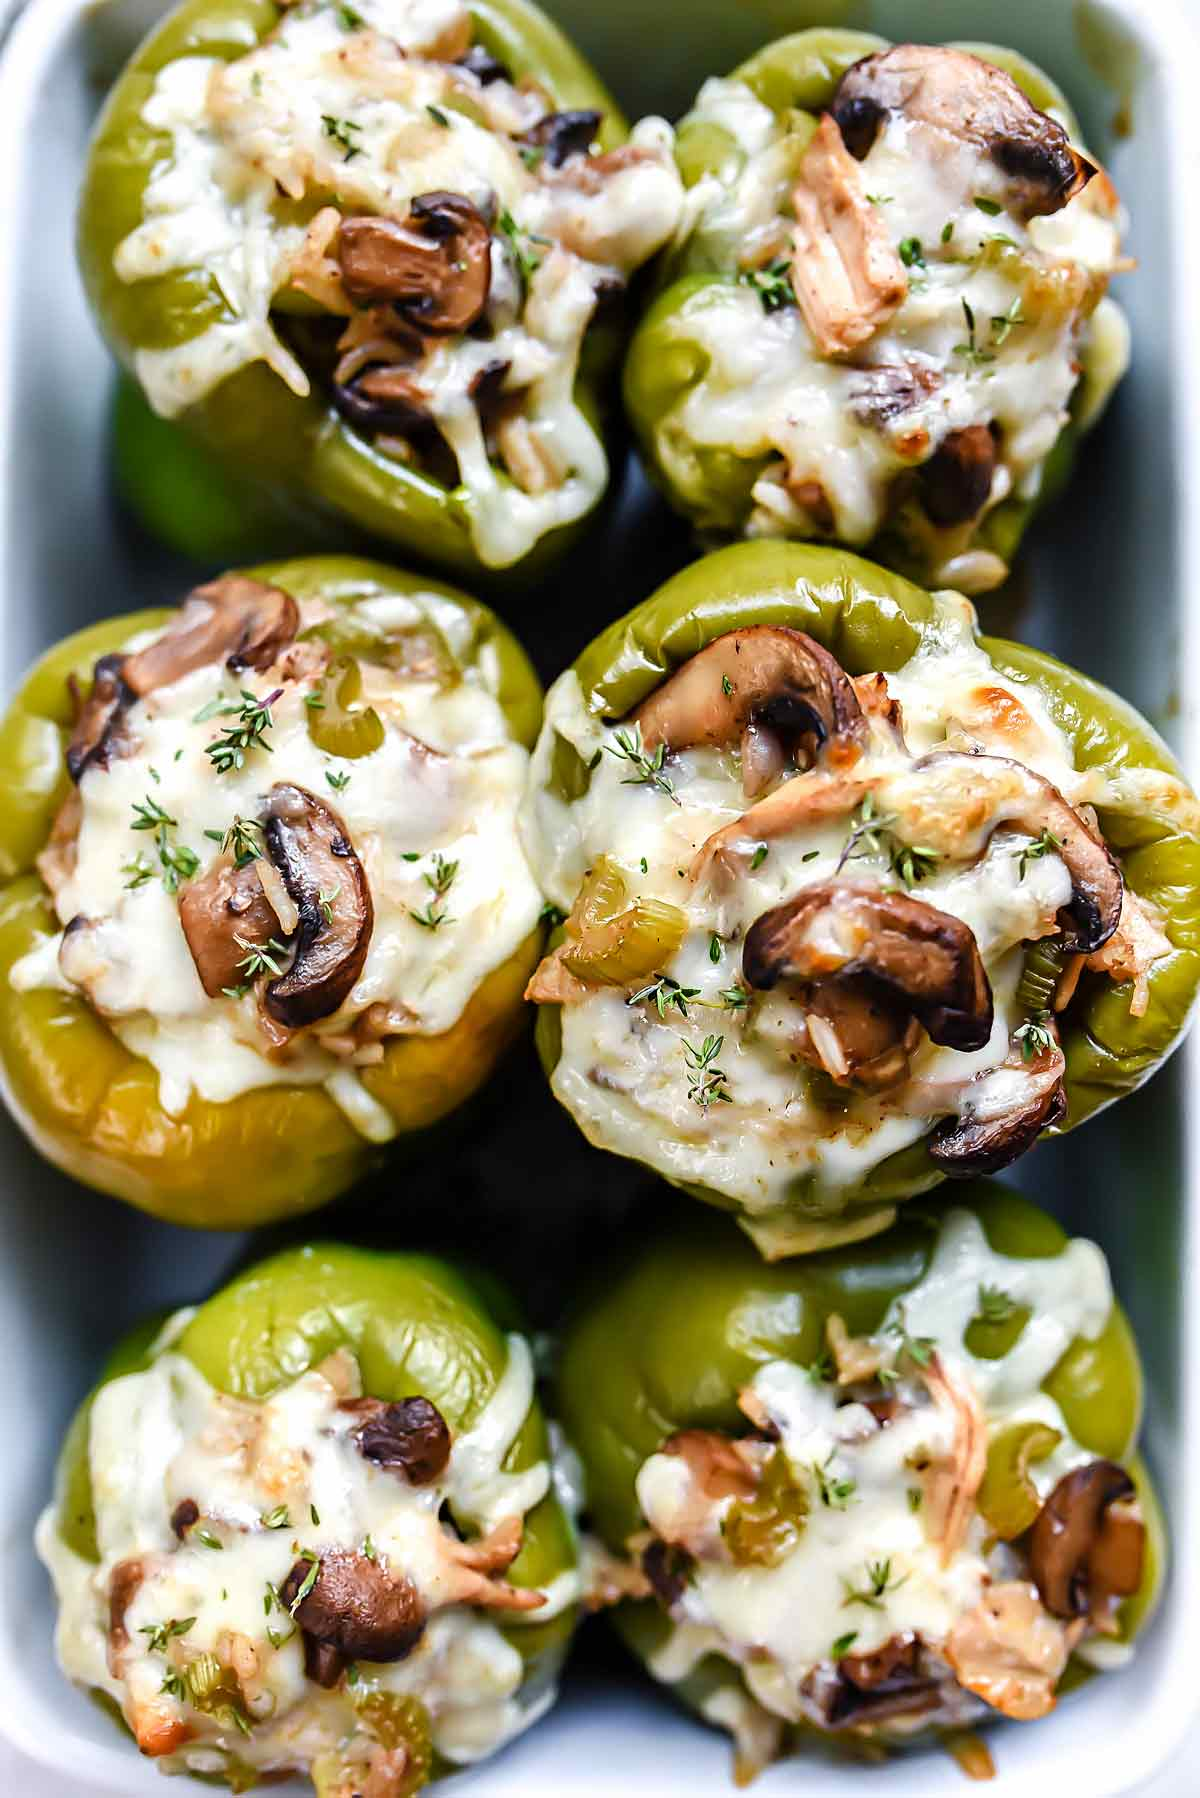 Creamy Chicken and Mushroom Stuffed Bell Peppers | foodiecrush.com #stuffed #peppers #peppered #bell #chicken #creamy #recipe